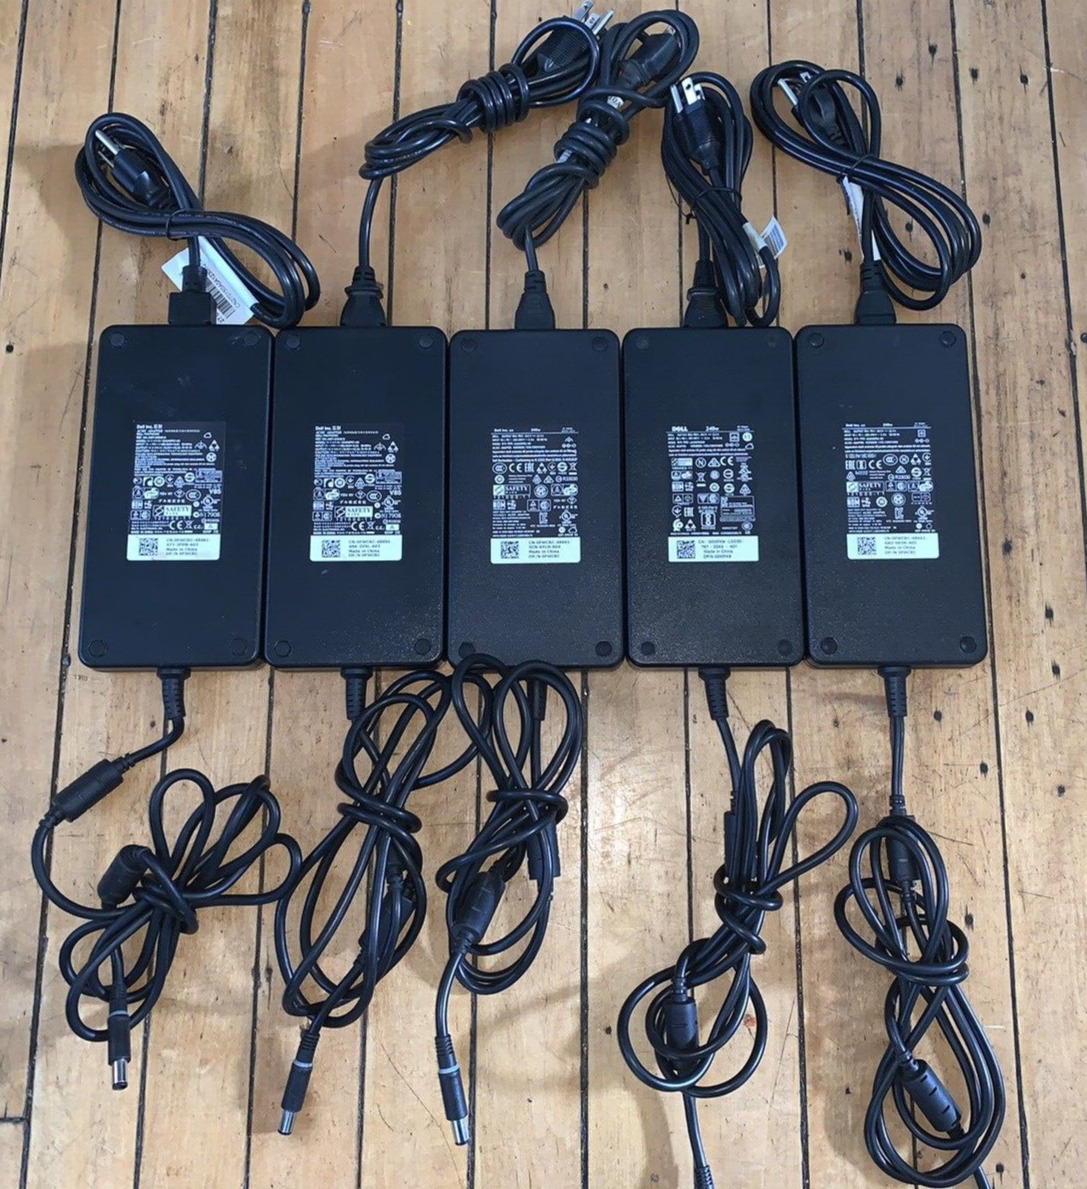 Lot: 5 OEM Dell 240W Adapter Laptop Charger for Dell Alienware 7.4mm Tested/Good